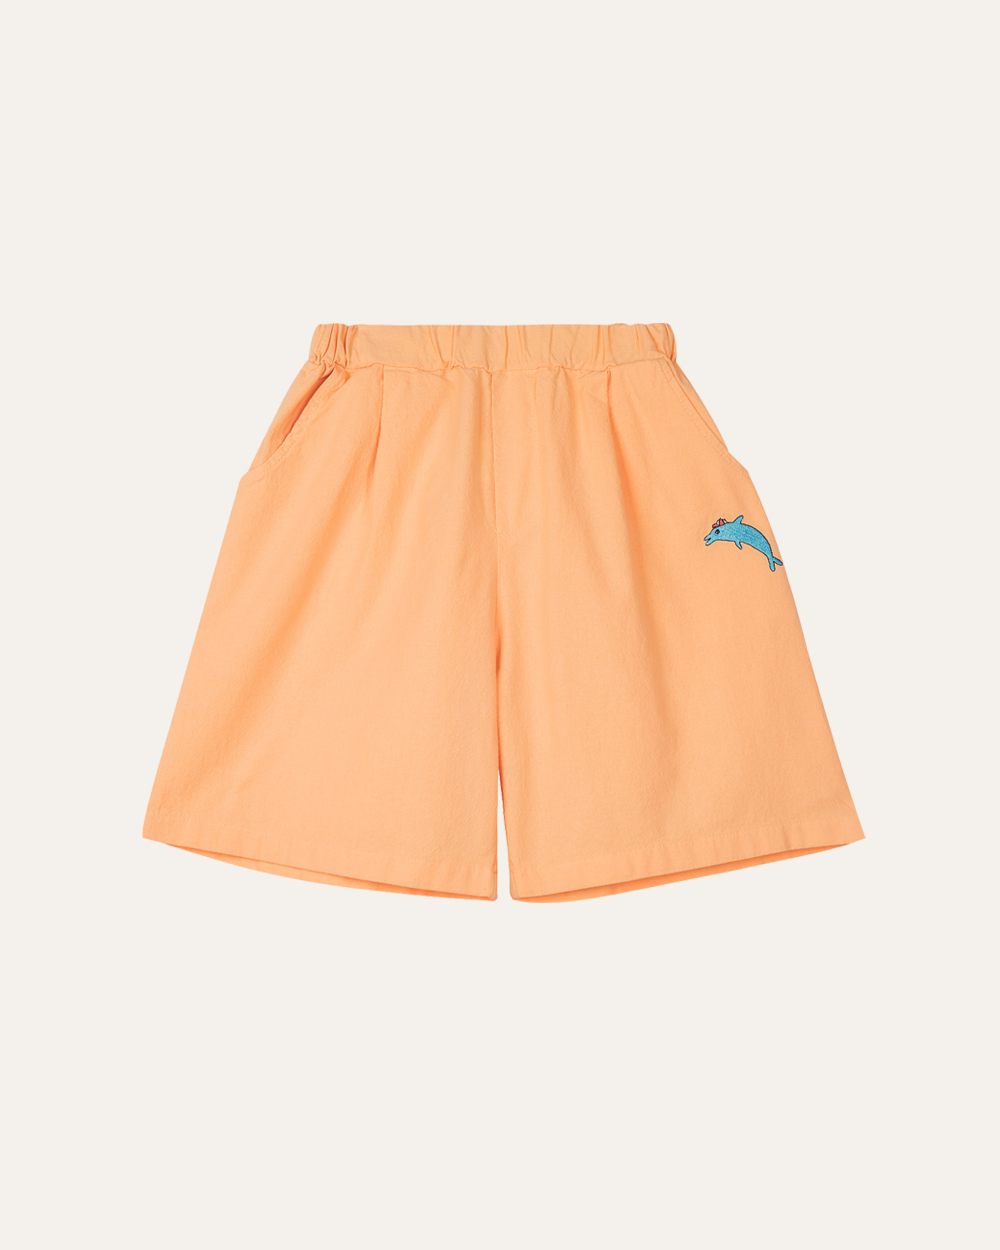 [ THE CAMPAMENTO ] DOLPHIN EMBROIDERY SHORTS